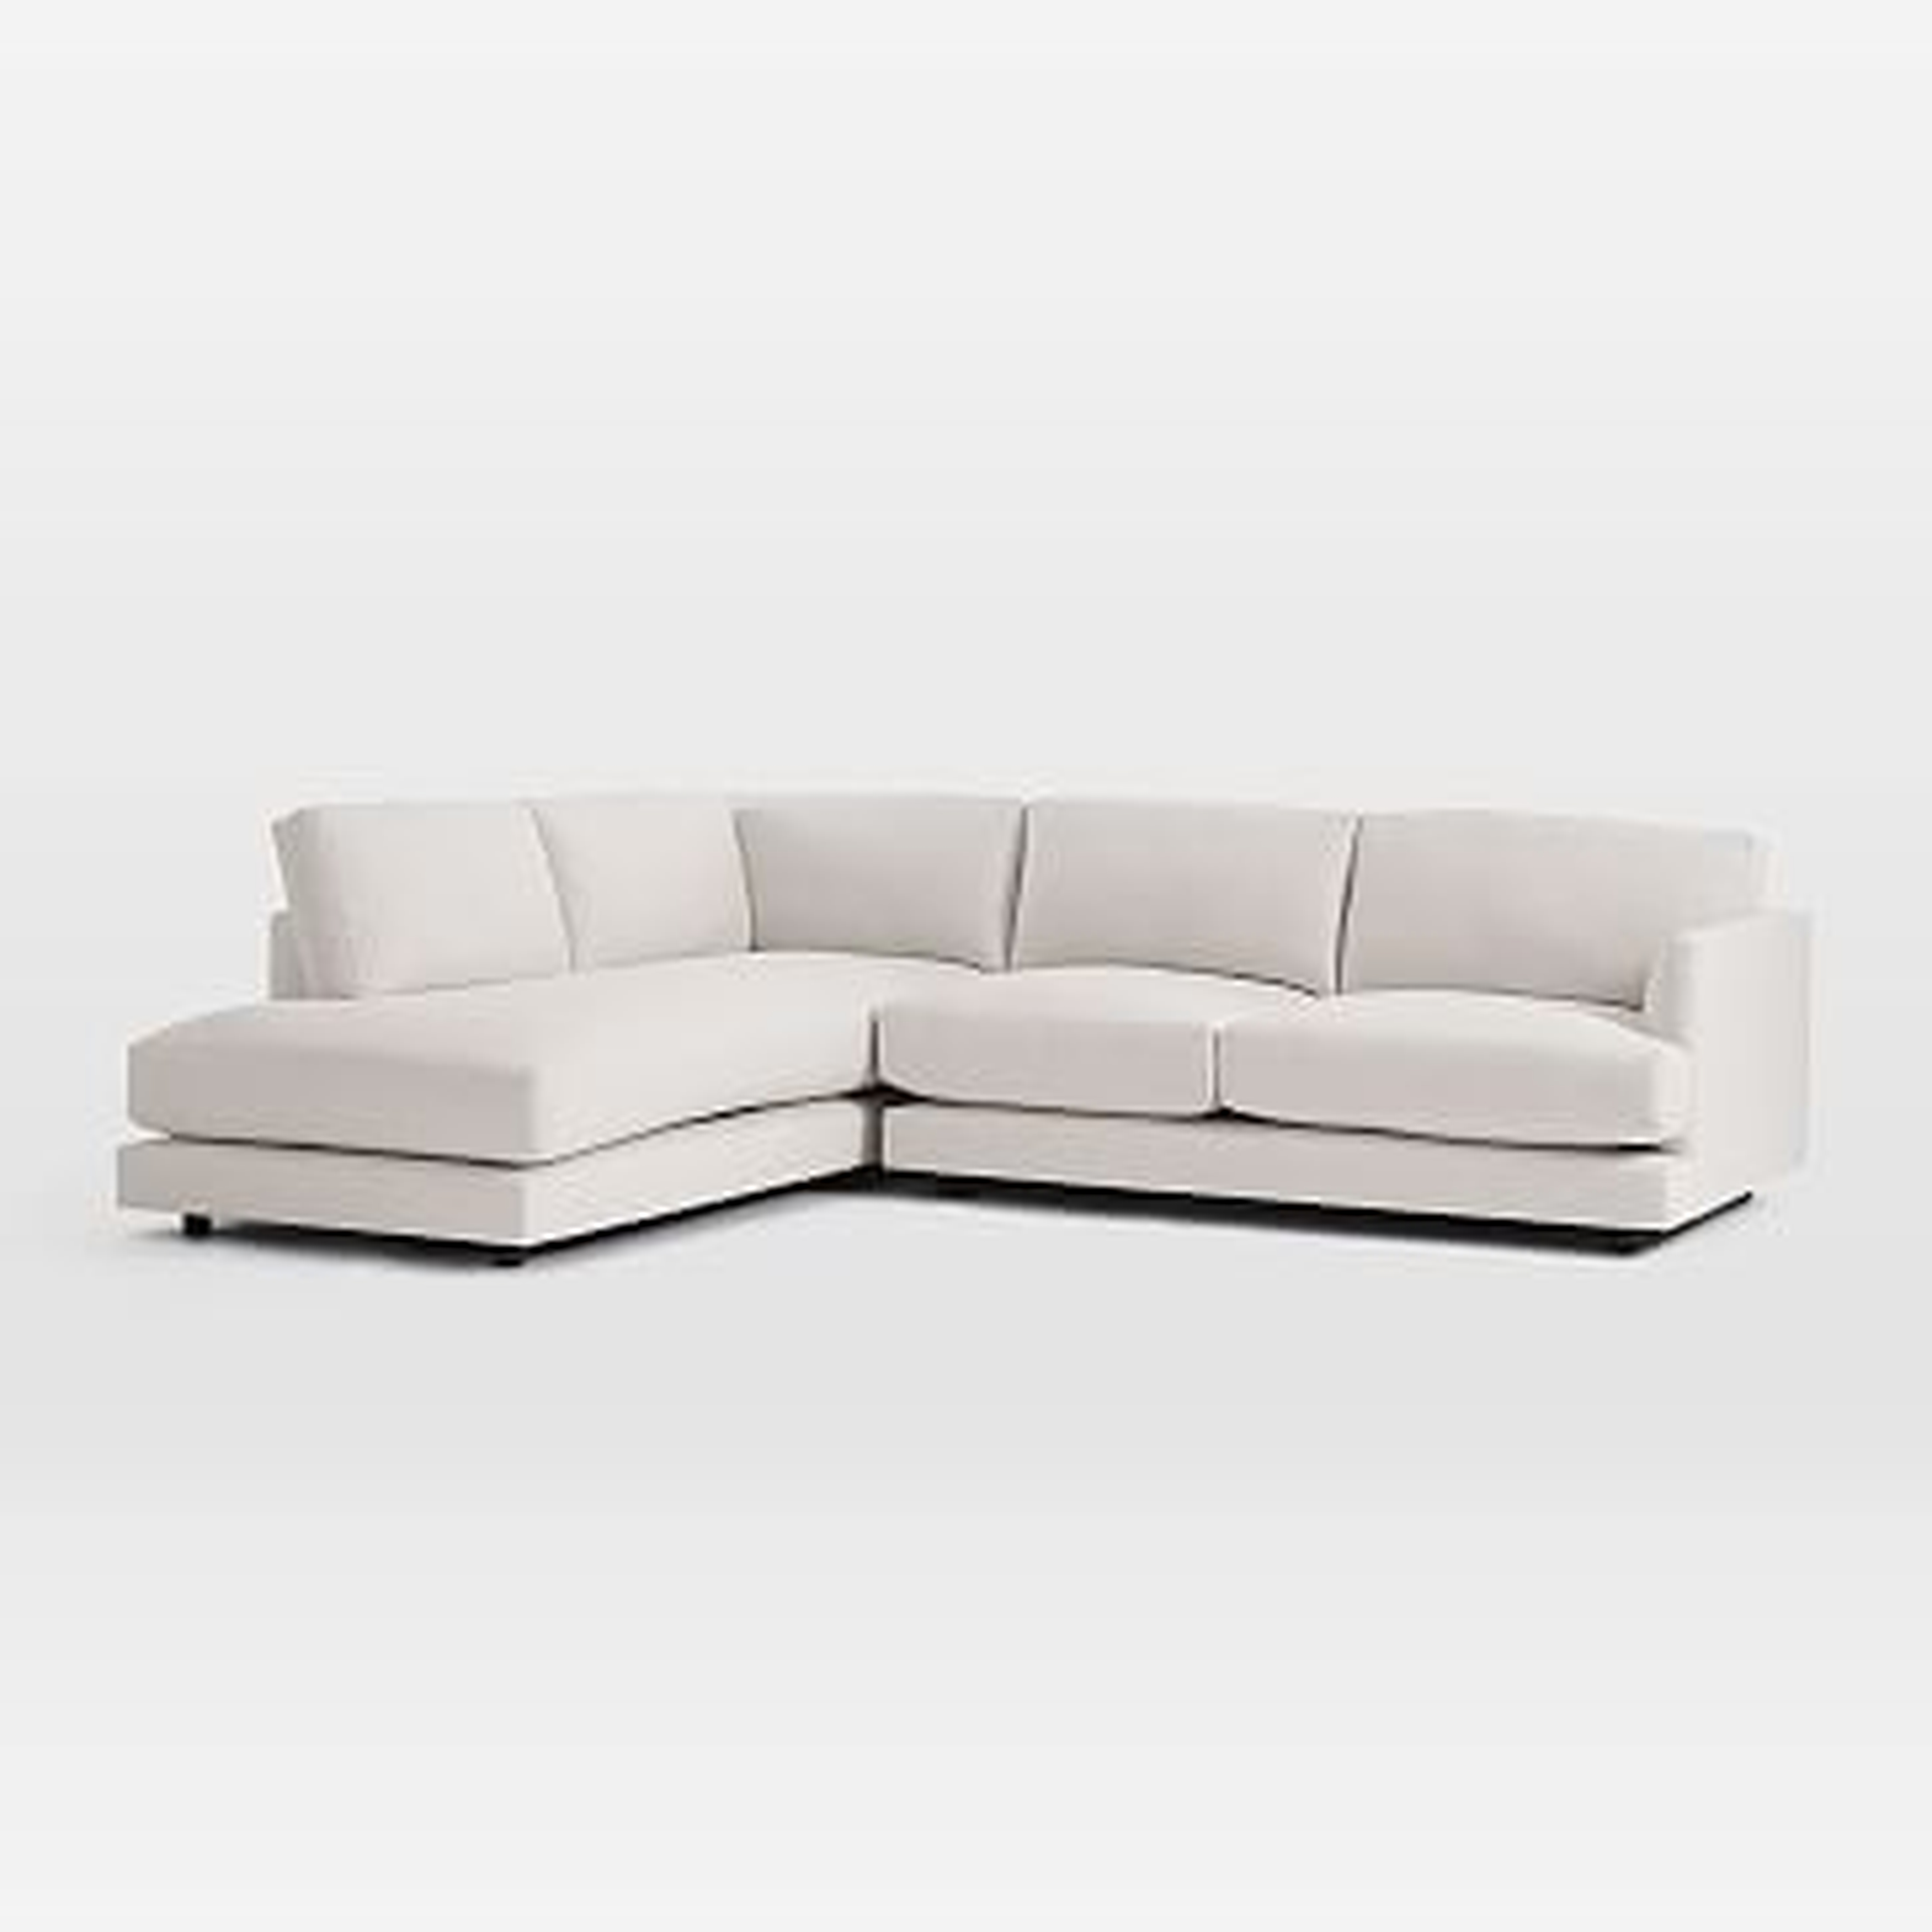 Haven Sectional Set 02 / Right Arm Sofa, Left Arm Terminal Chaise / Oyster, Eco Weave - West Elm